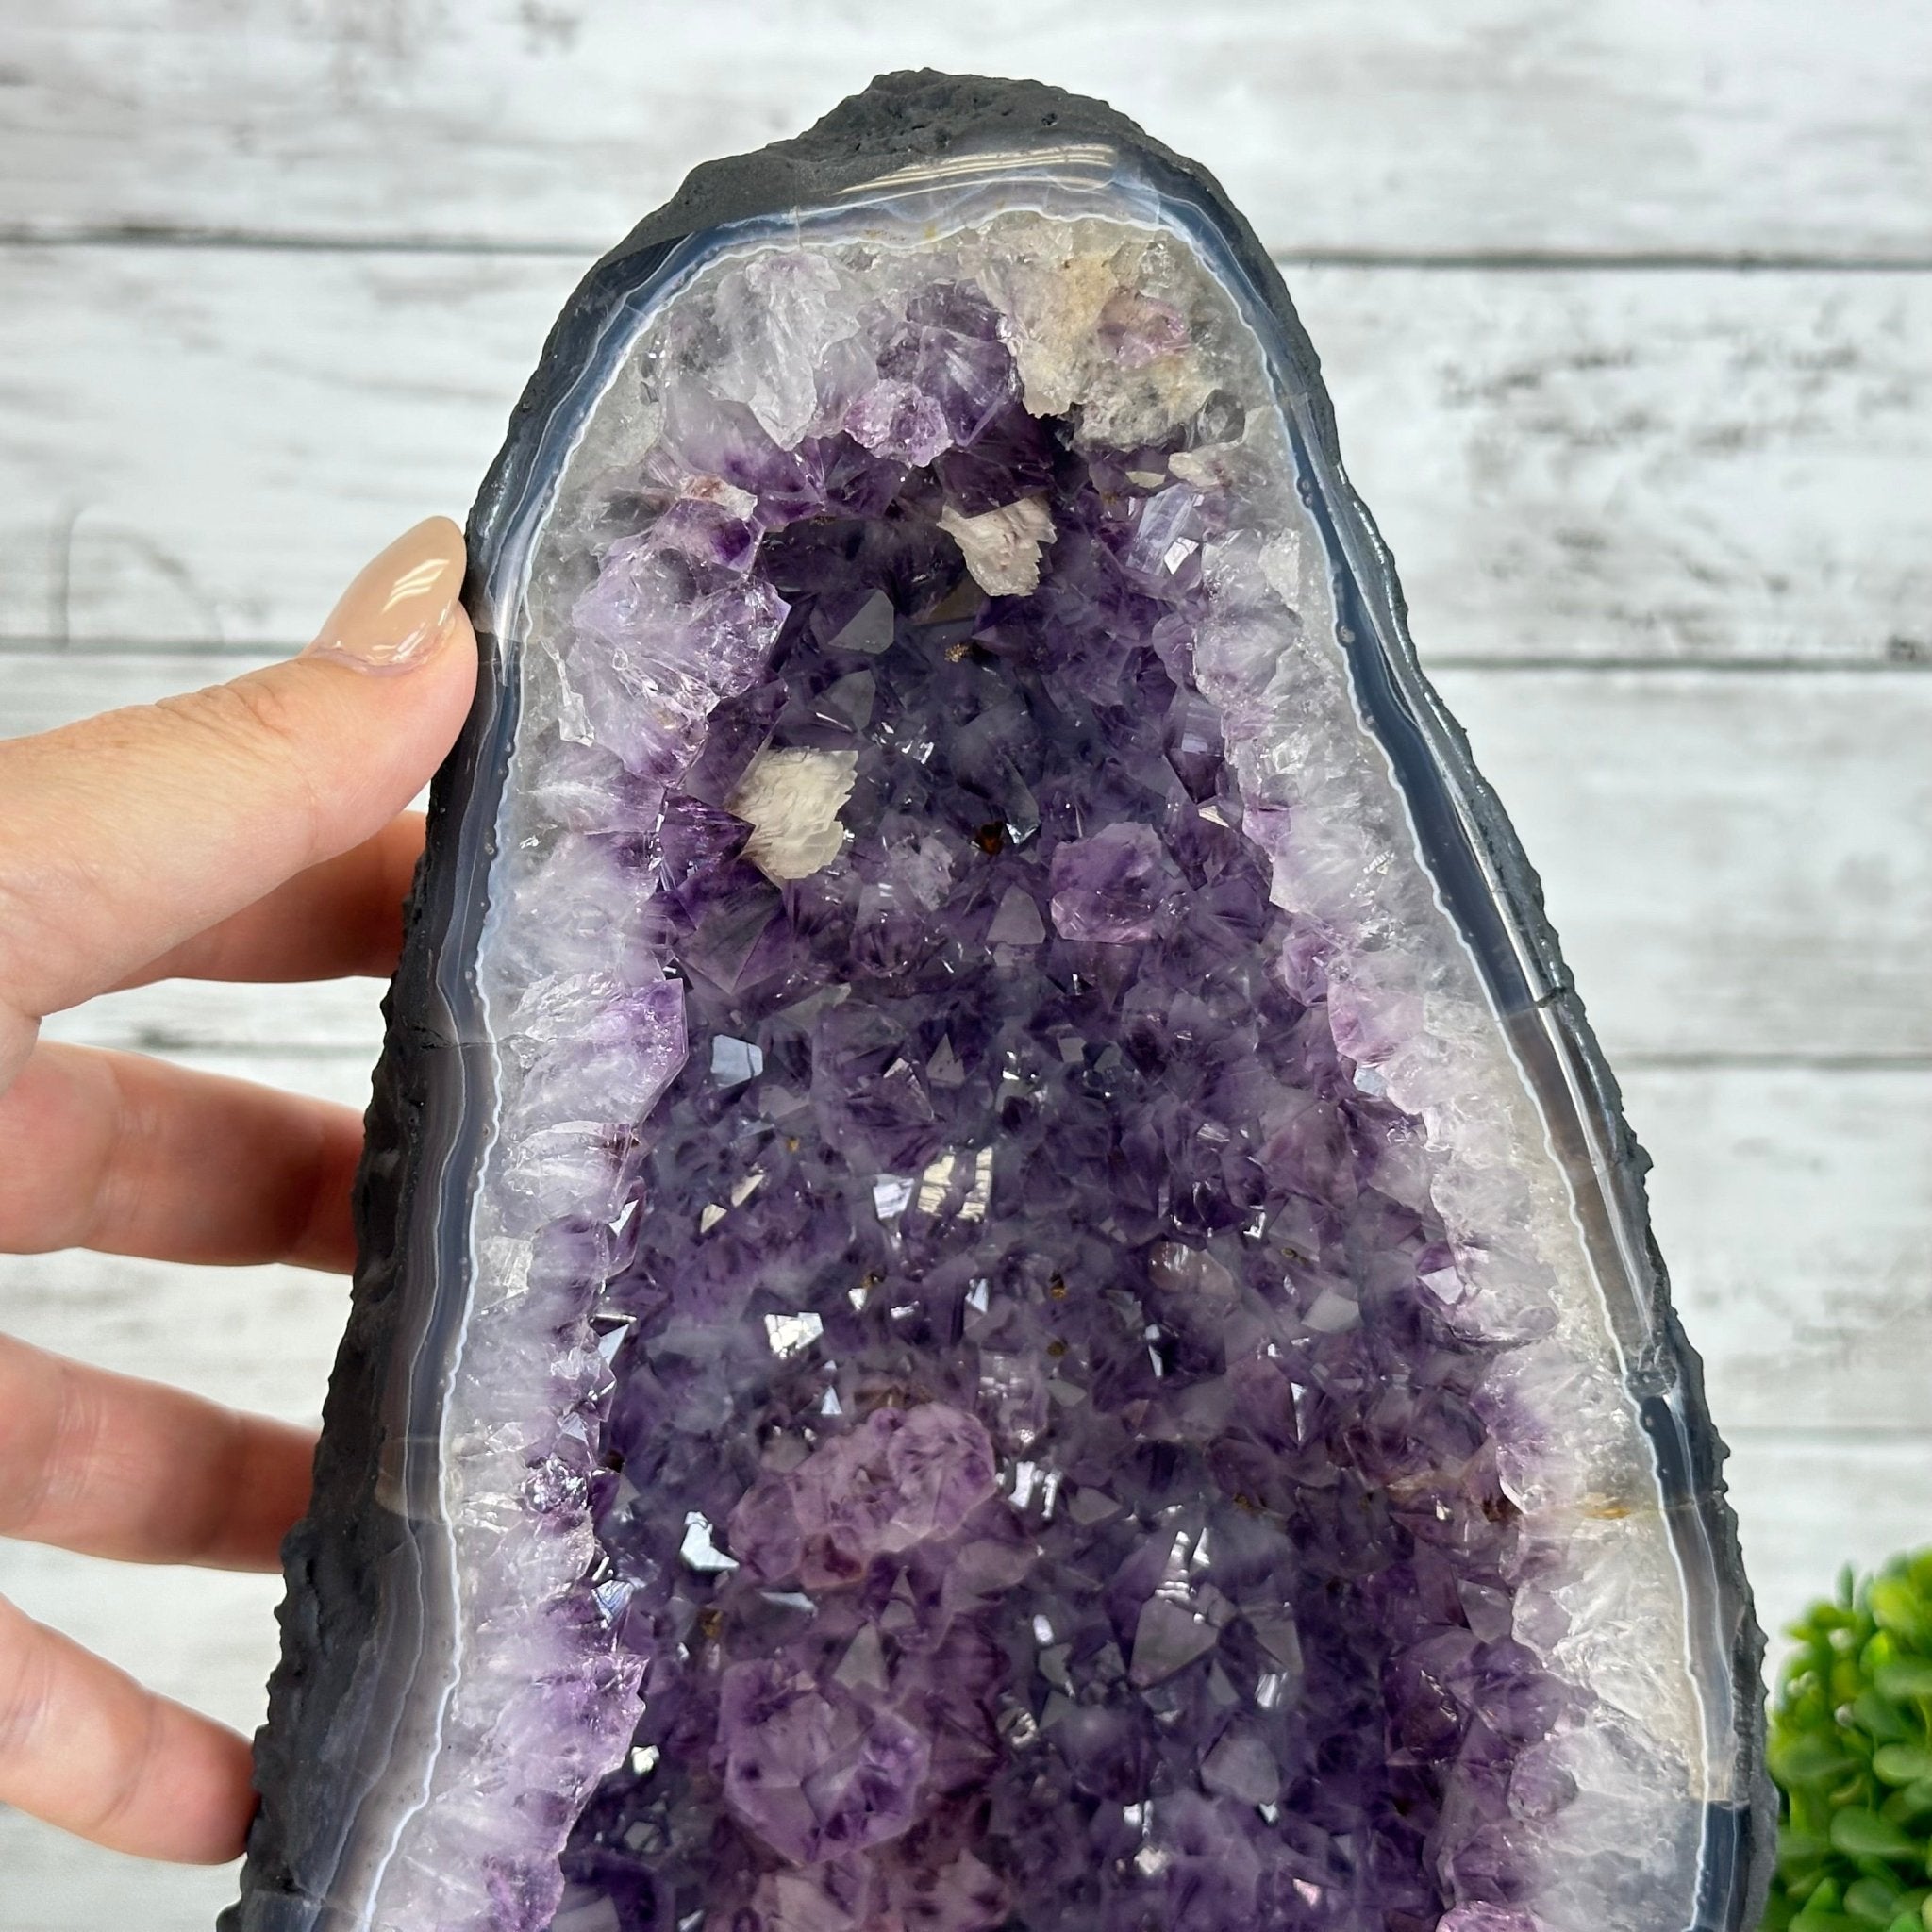 Quality Brazilian Amethyst Cathedral, 17.2 lbs & 13.8" Tall, #5601 - 1372 - Brazil GemsBrazil GemsQuality Brazilian Amethyst Cathedral, 17.2 lbs & 13.8" Tall, #5601 - 1372Cathedrals5601 - 1372